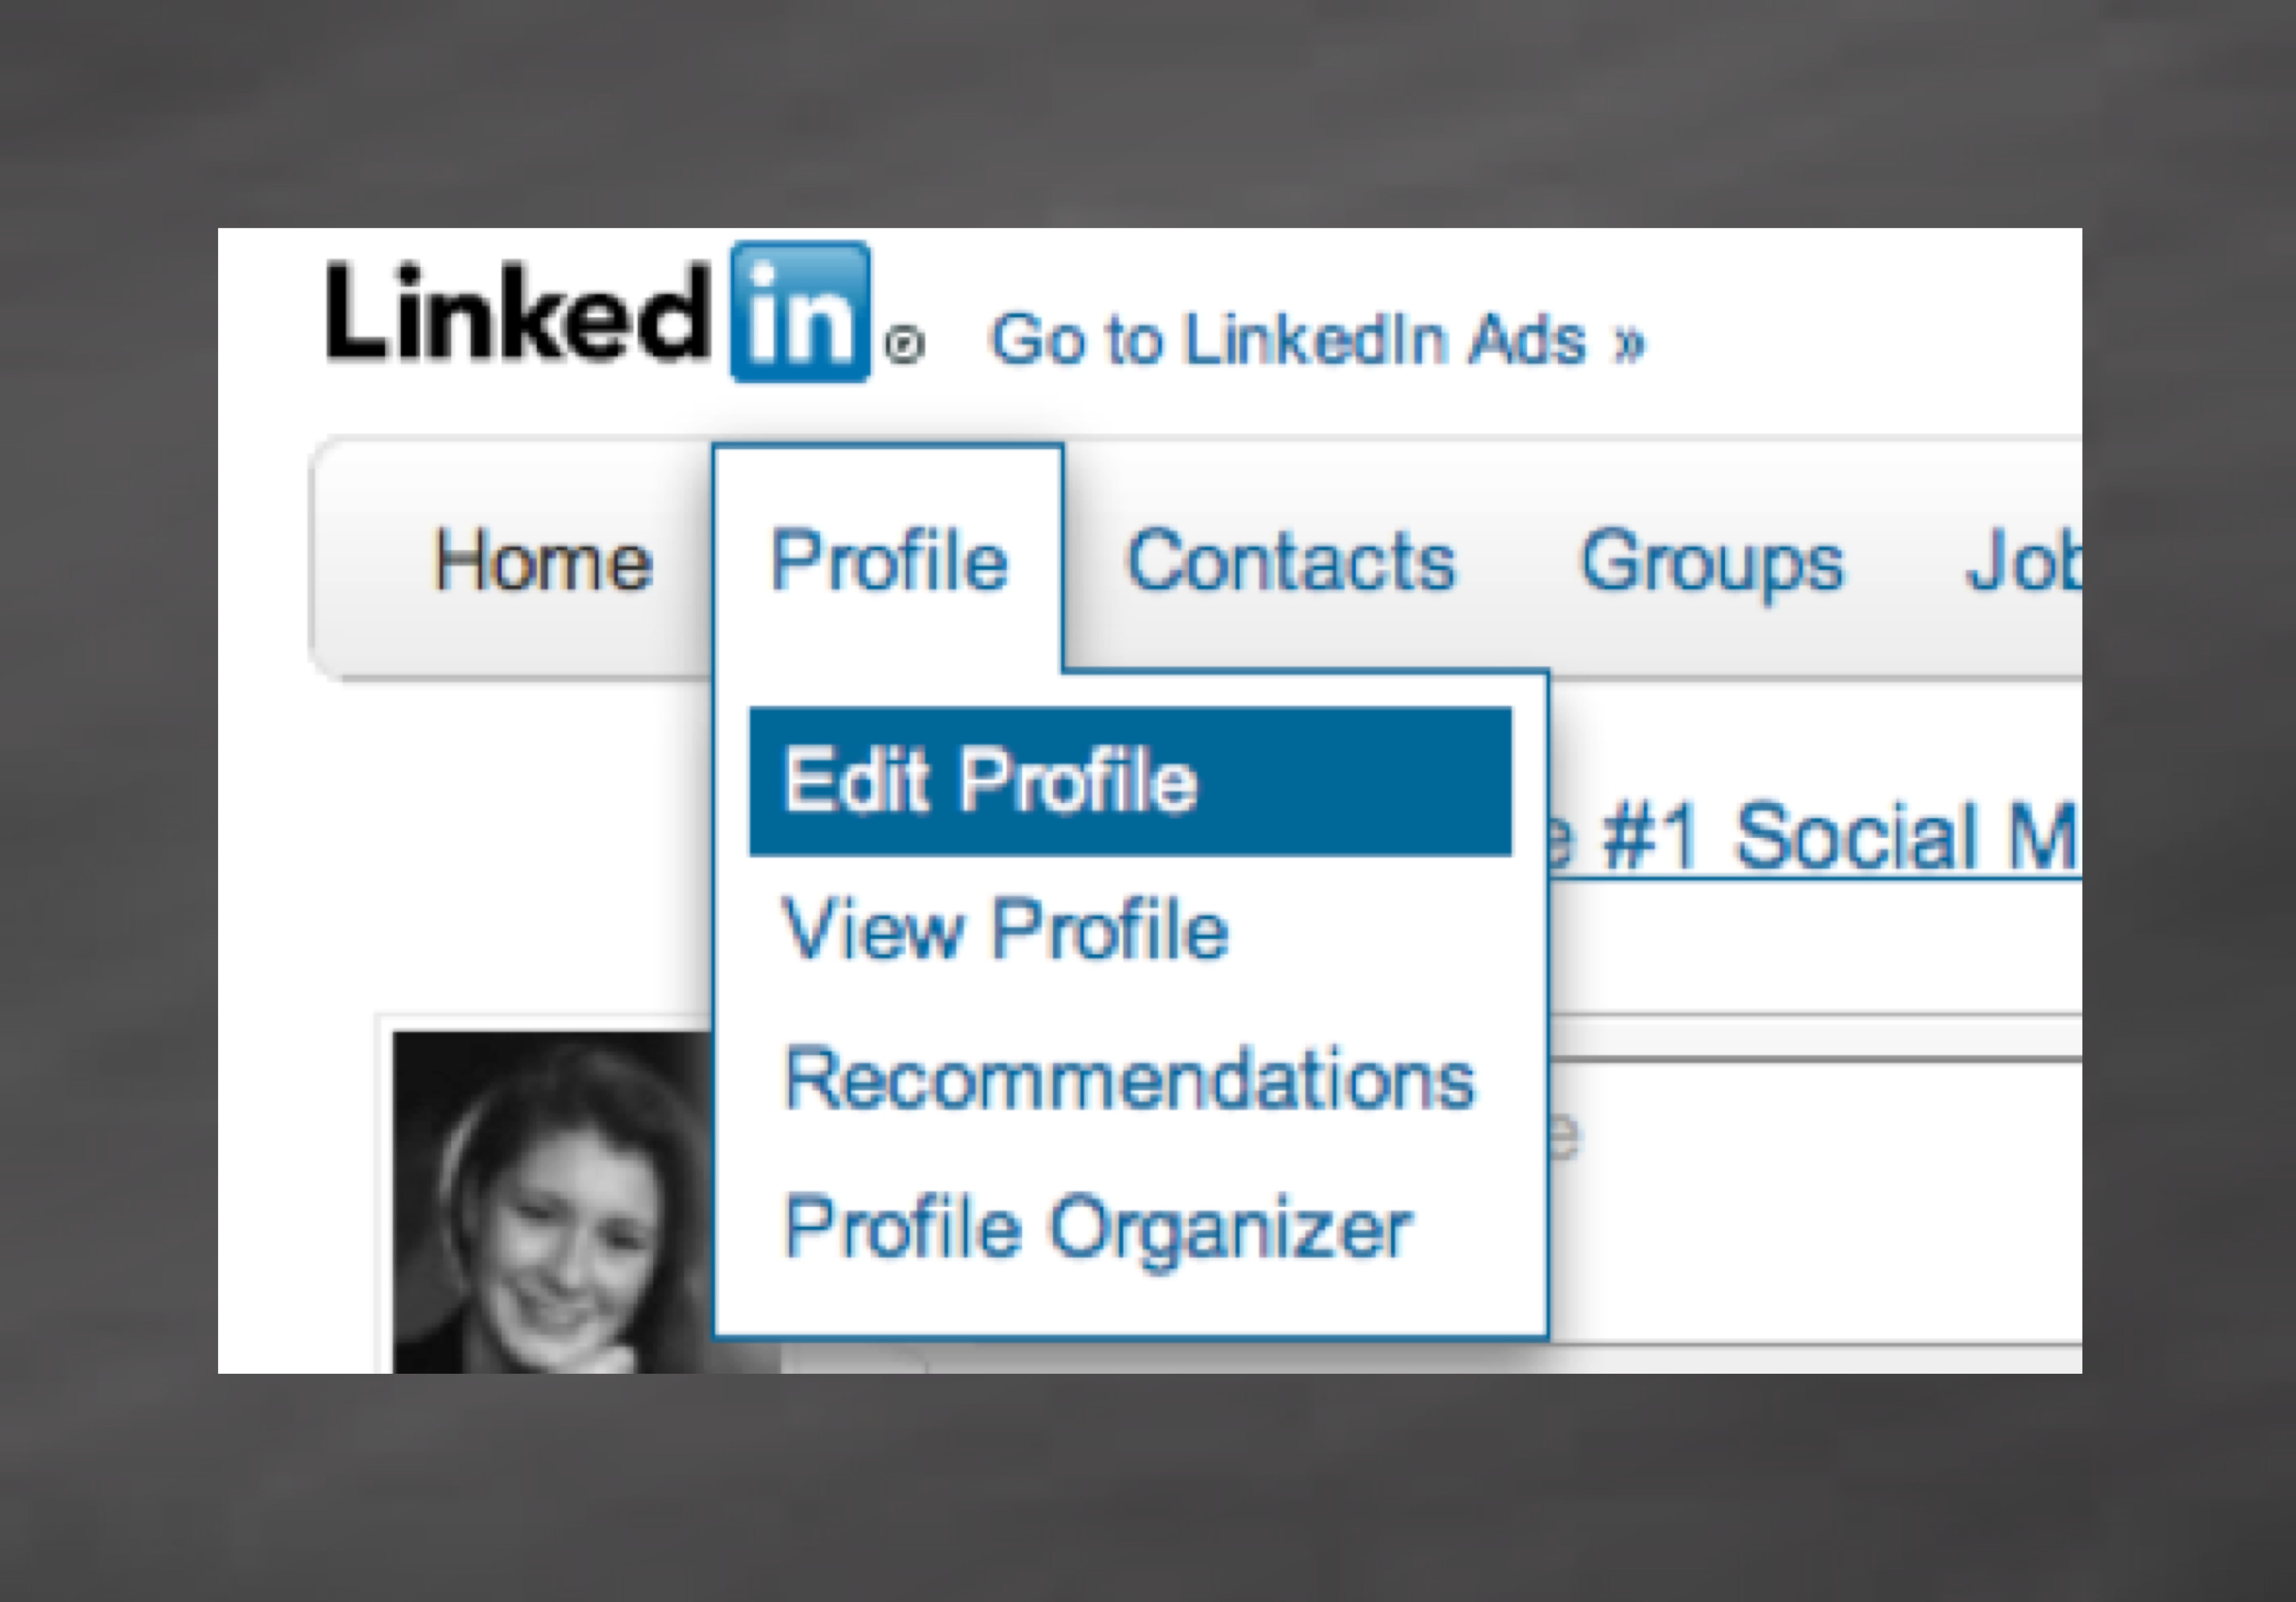 How Can I See Another Persons’ LinkedIn Profile Without Them Knowing? (VIDEO)